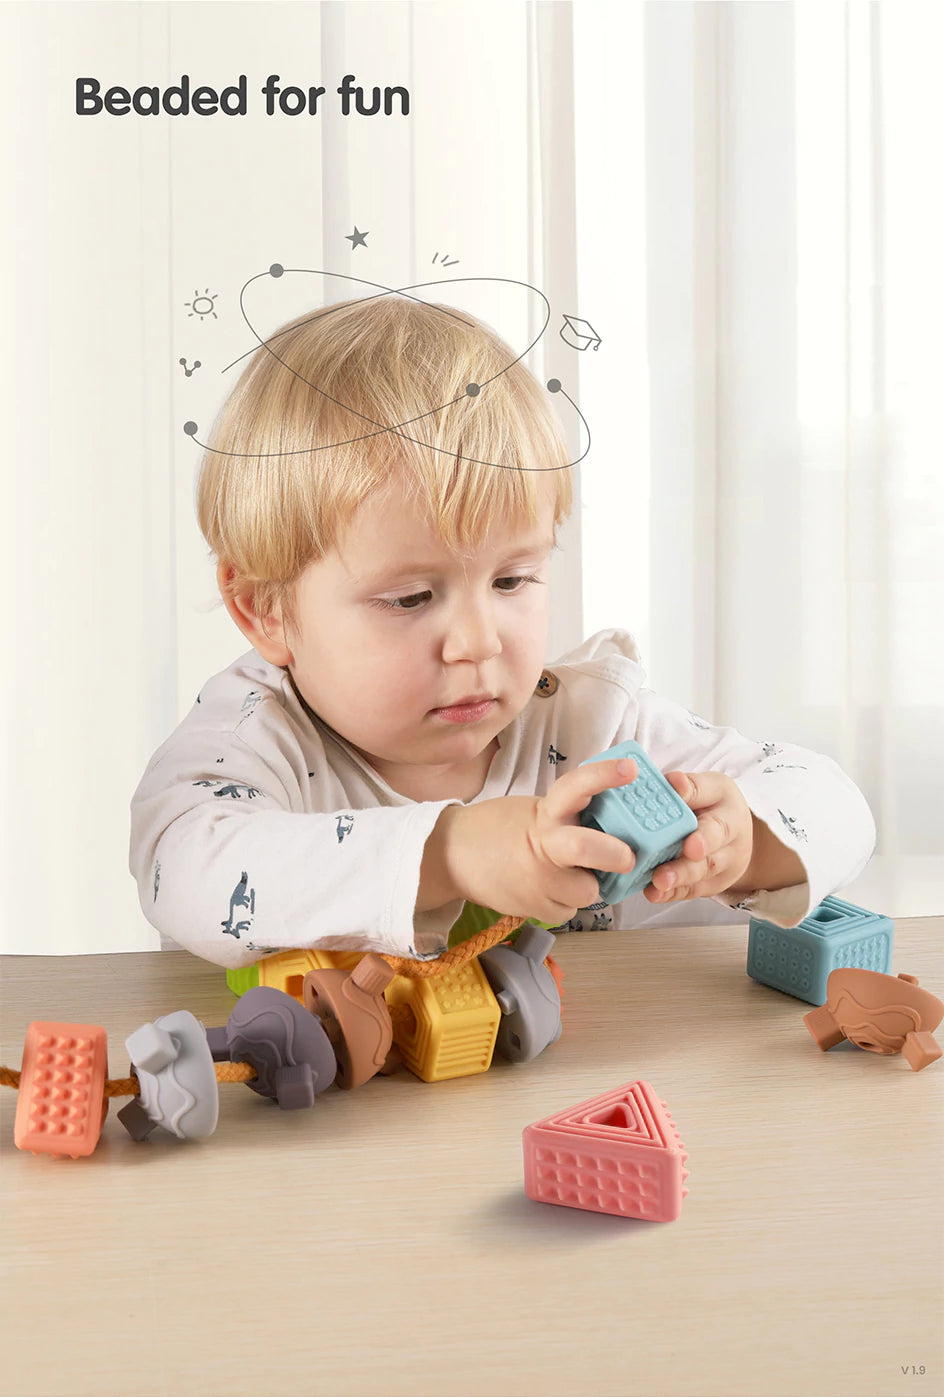 Tactile exploration with soft building blocks for kids